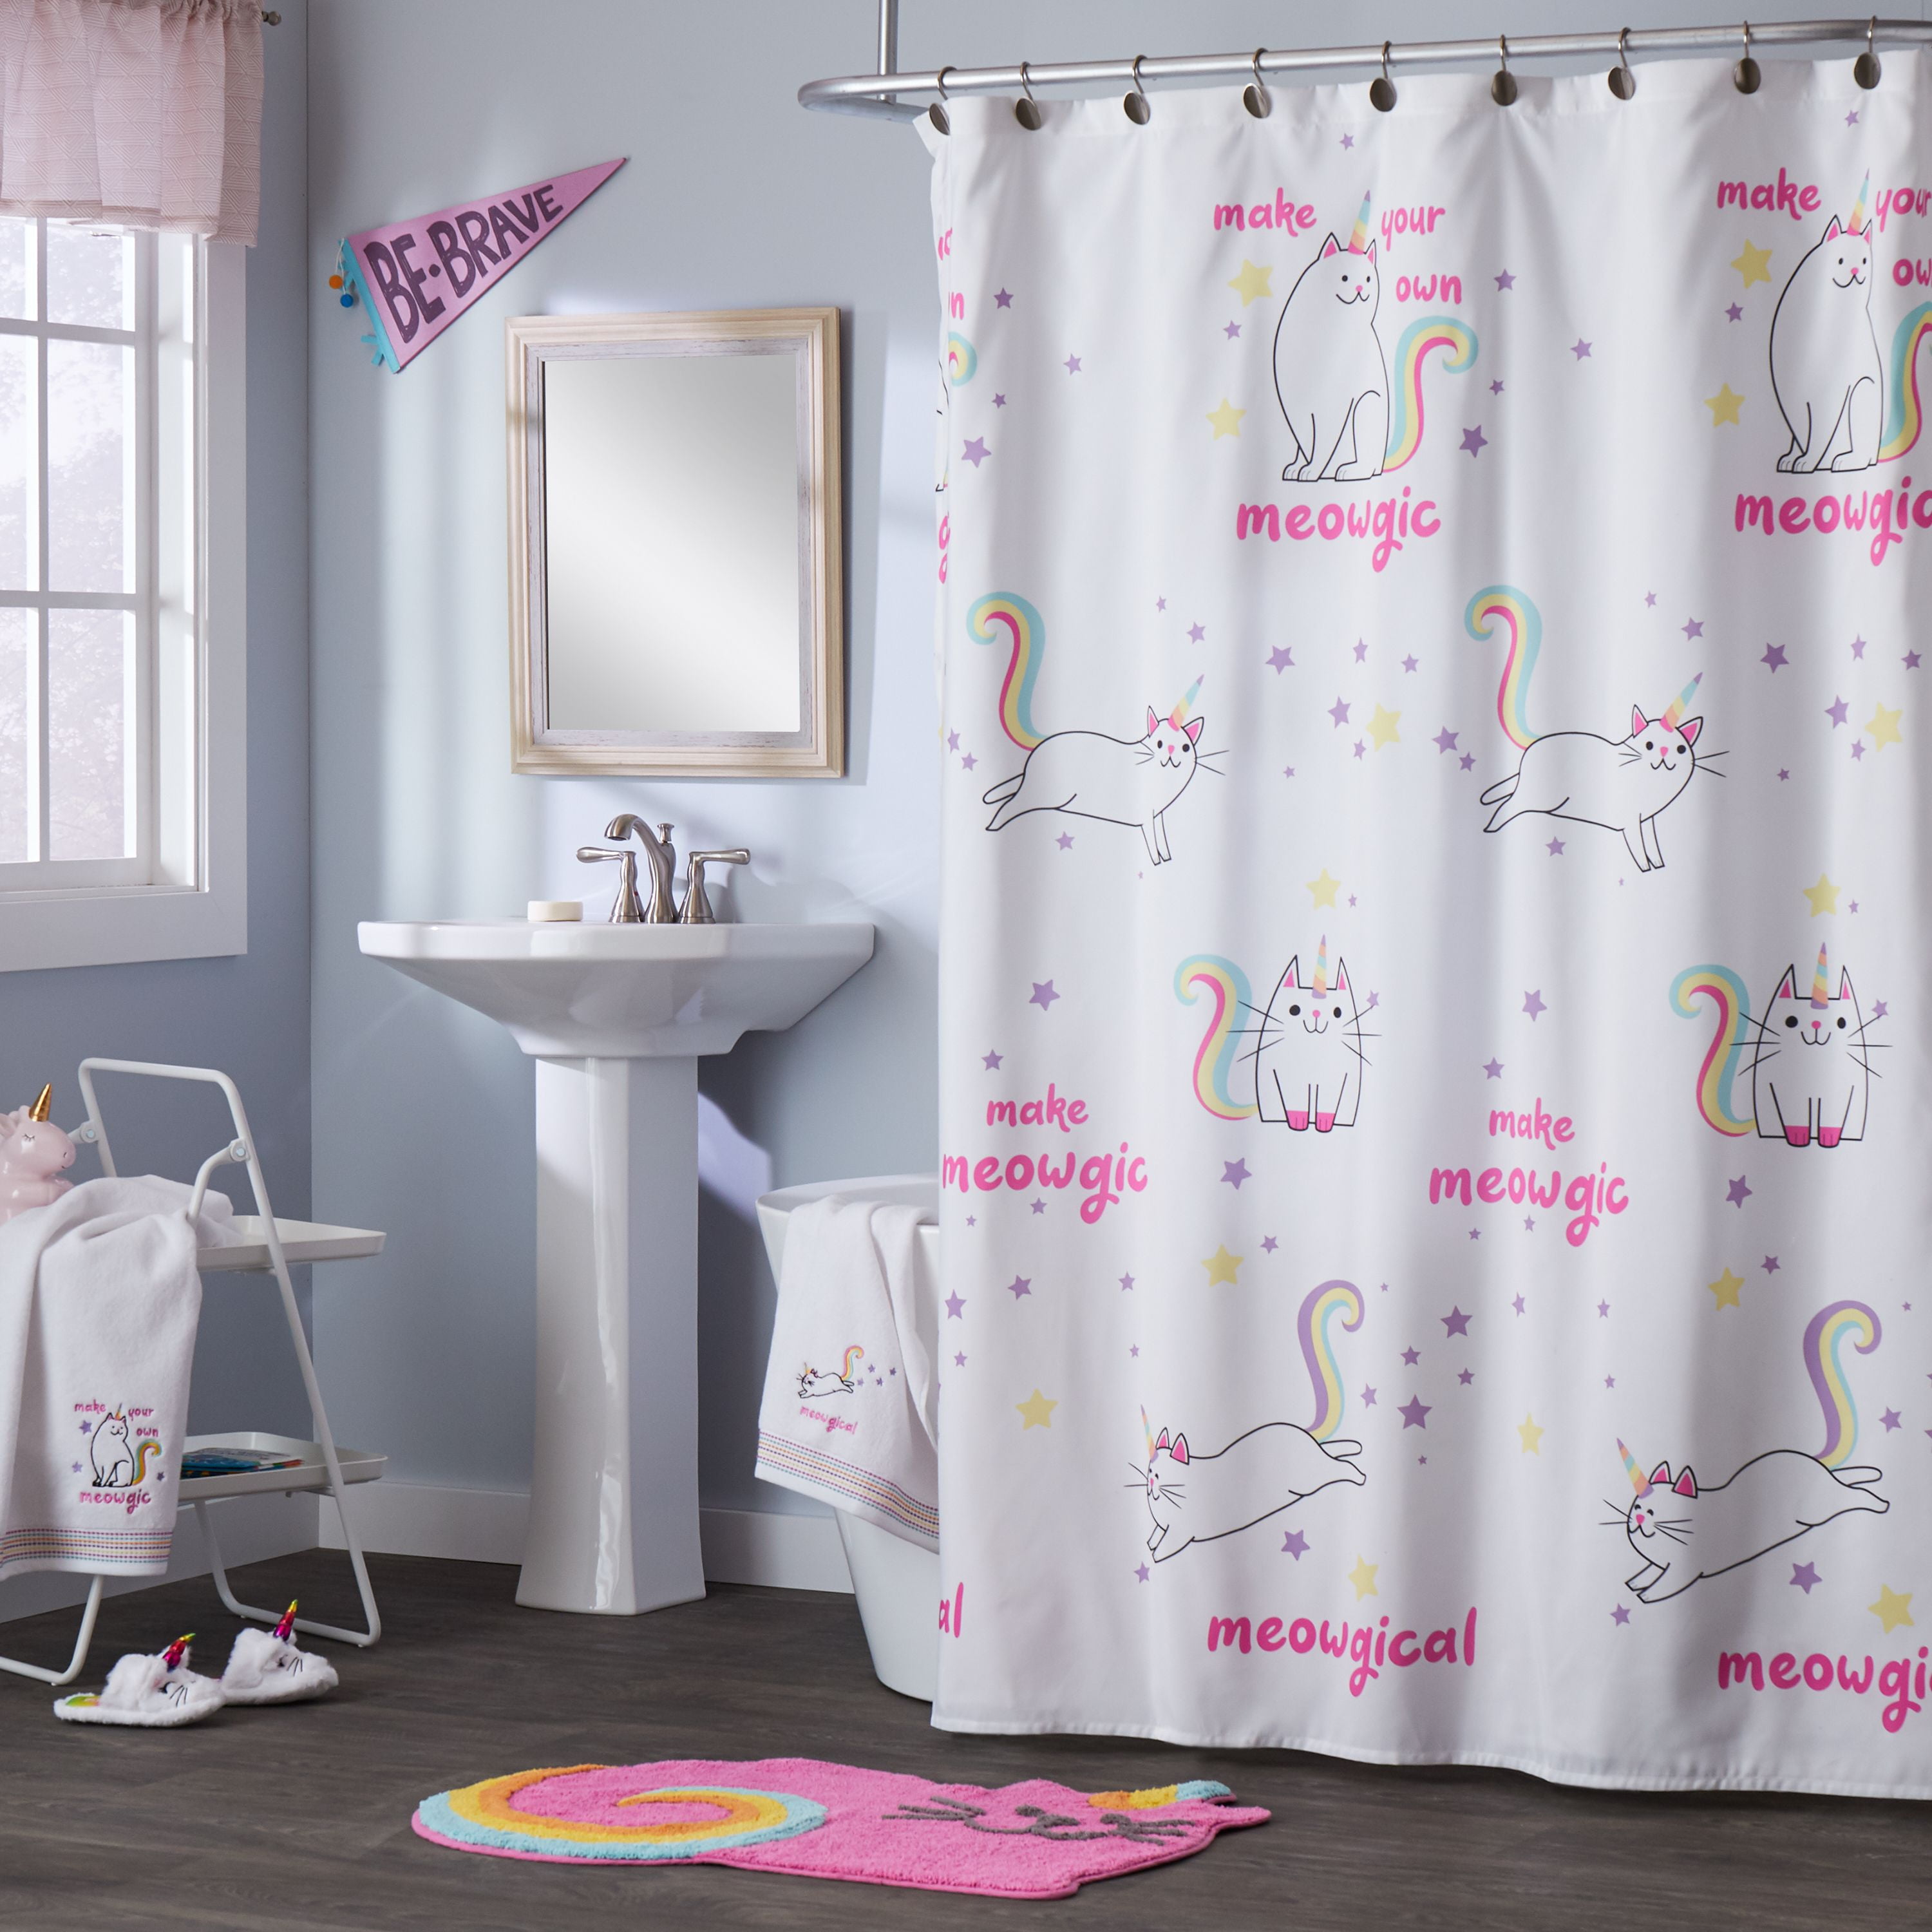 Skl Home Meowgical Shower Curtain 70, Magical Thinking Pom Shower Curtain